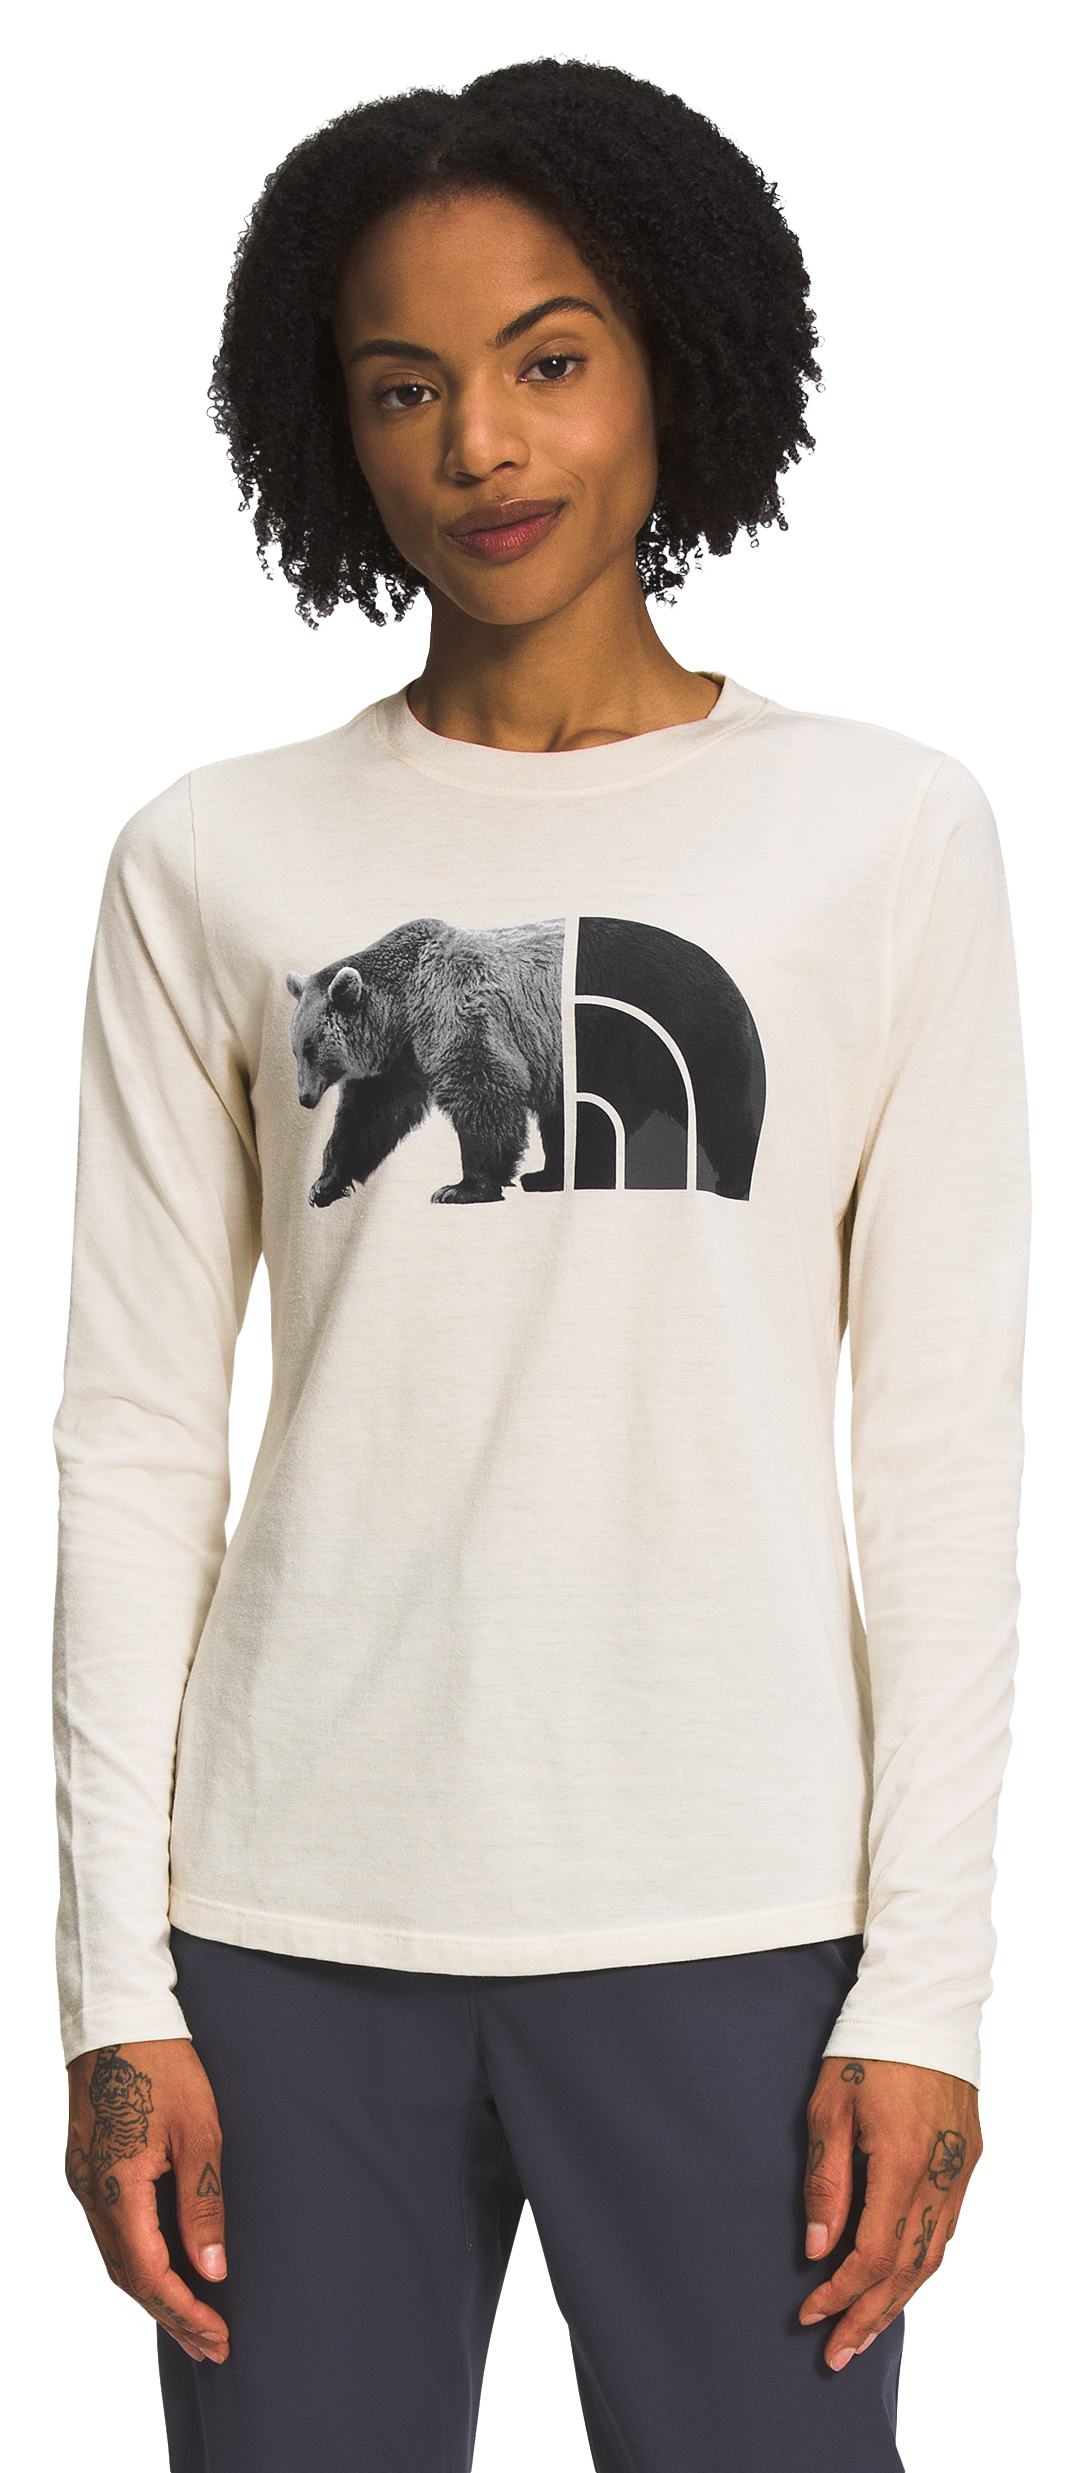 The North Face Tri-Blend Bear Long-Sleeve T-Shirt for Ladies - Gardenia White Heather/TNF Black - S